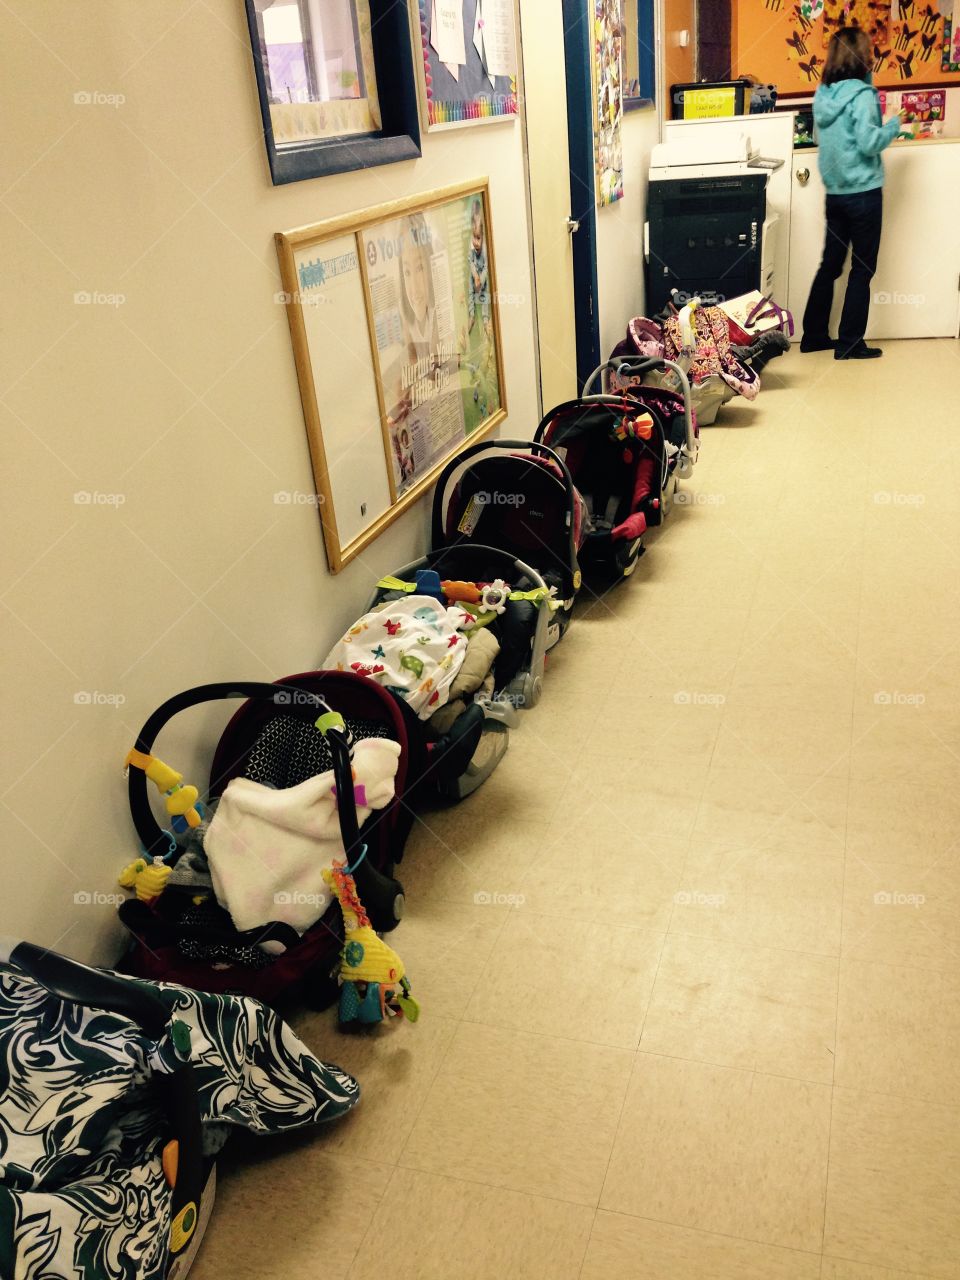 Track Infant Carriers. This daycare scene disturbed me, so I took a picture. This might be part of what is wrong with this world. 